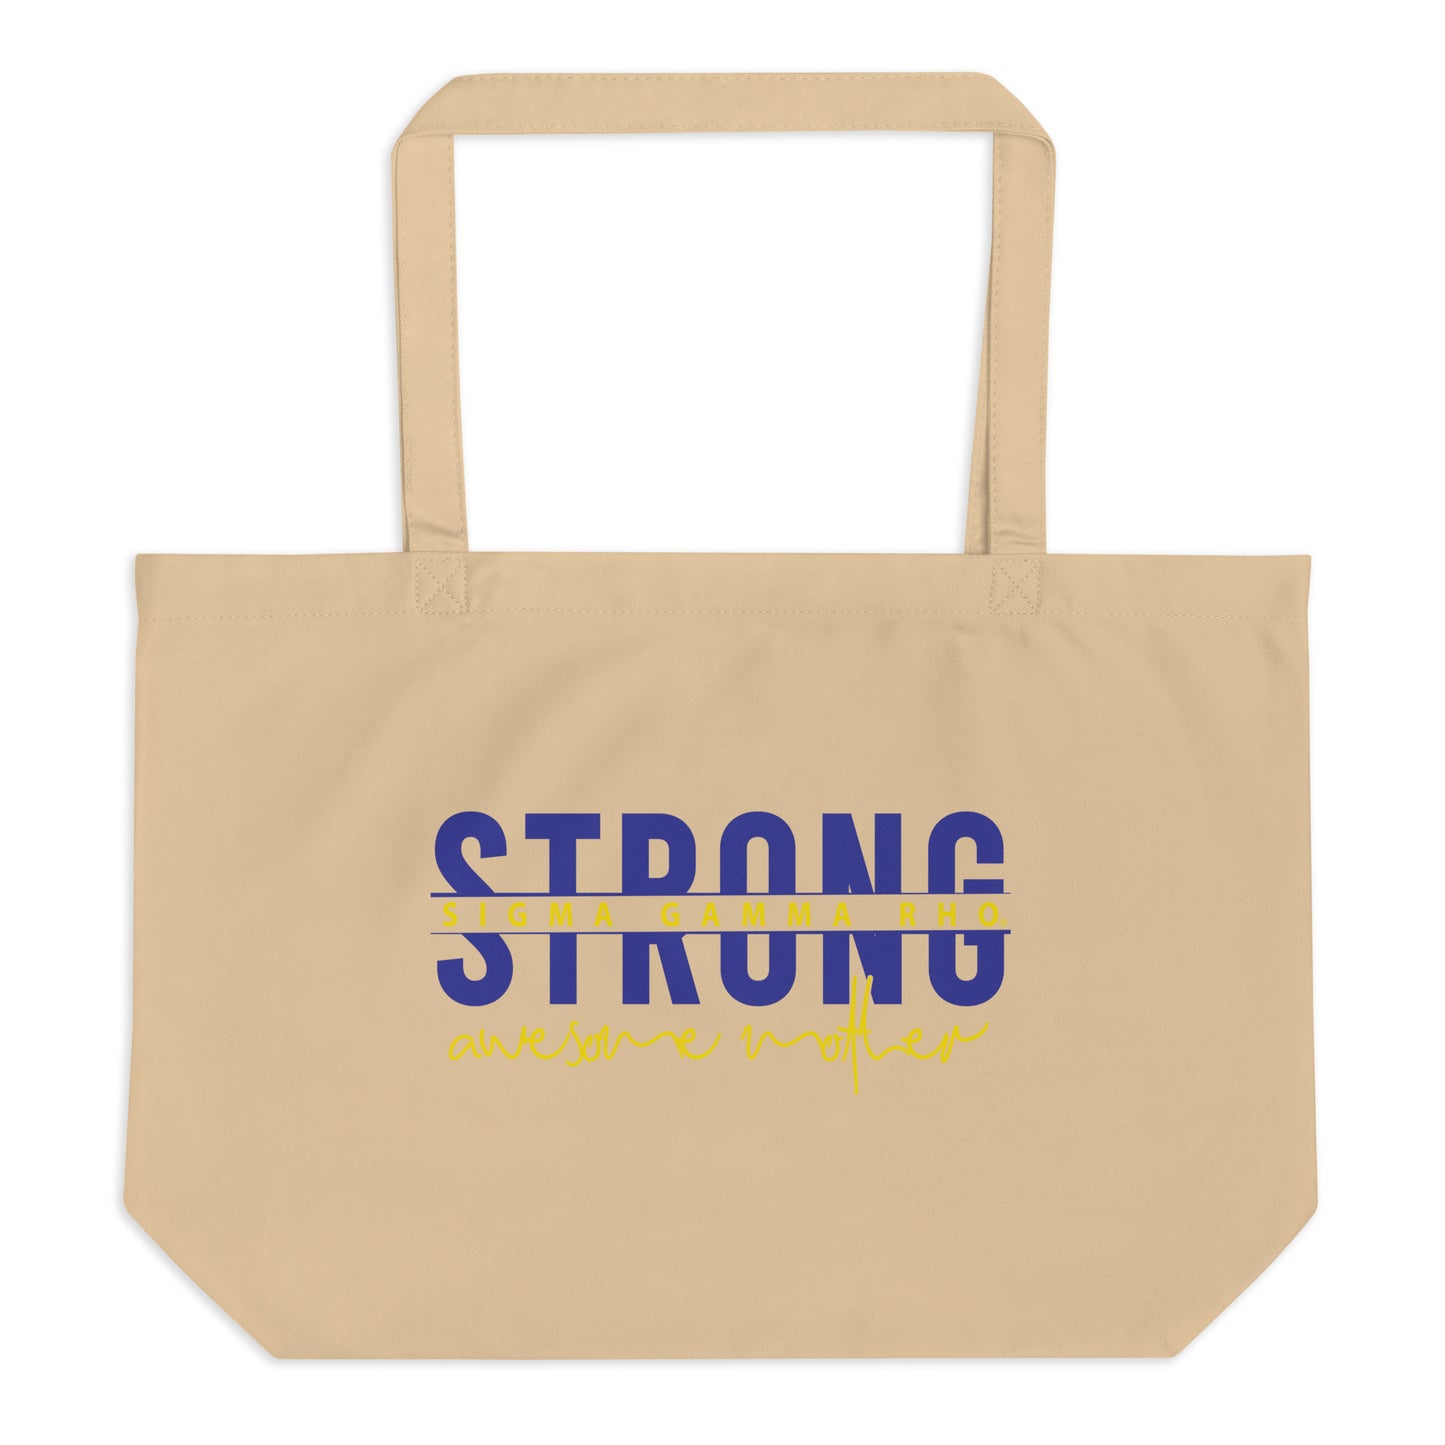 Sigma Gamma Rho Strong Awesome Mother Large organic tote bag